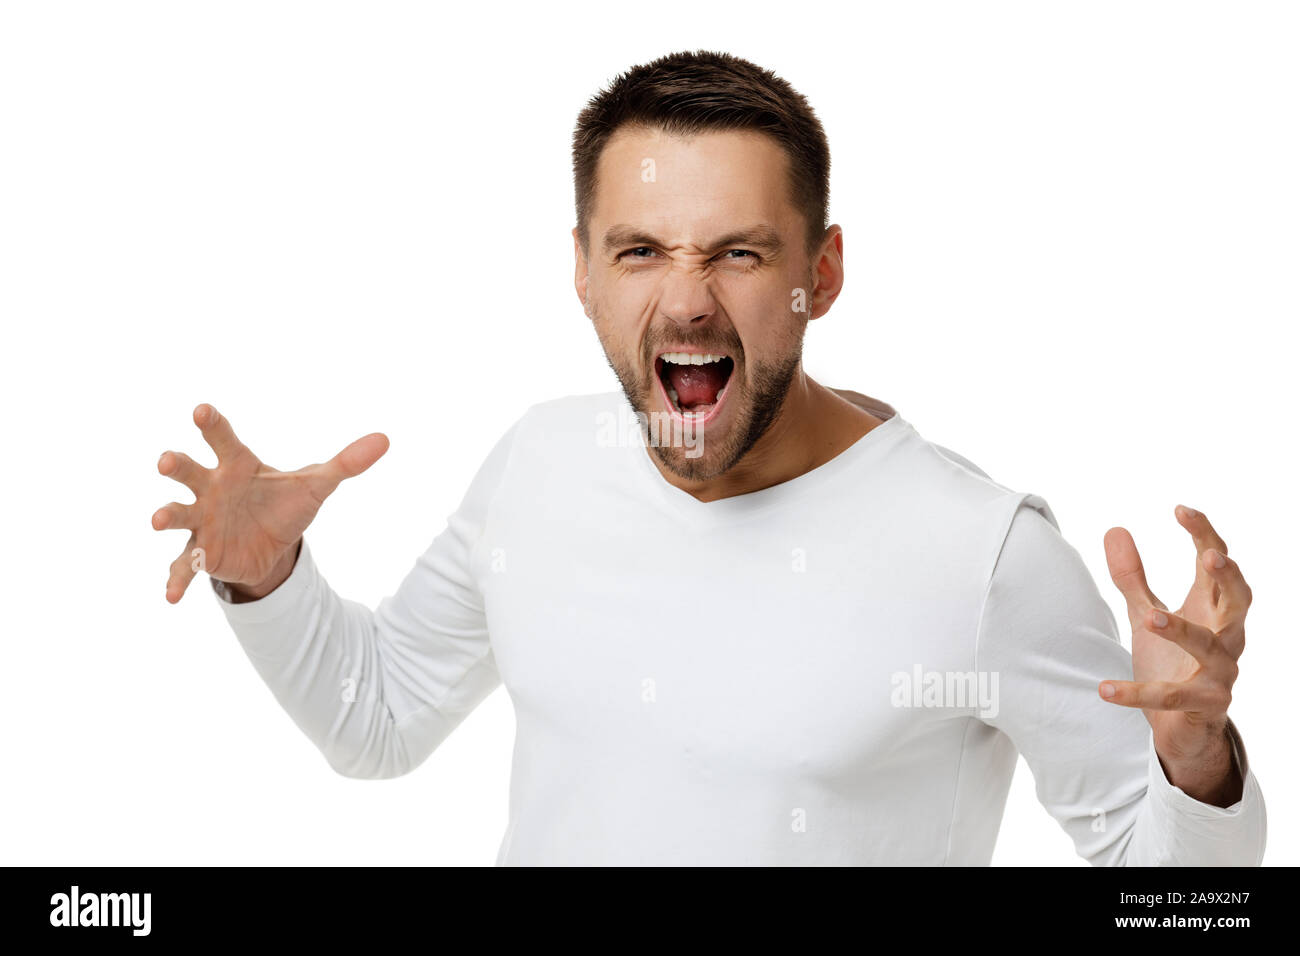 portrait of furious enraged bearded man in casual white shirt shouting and screaming isolated on white background Stock Photo